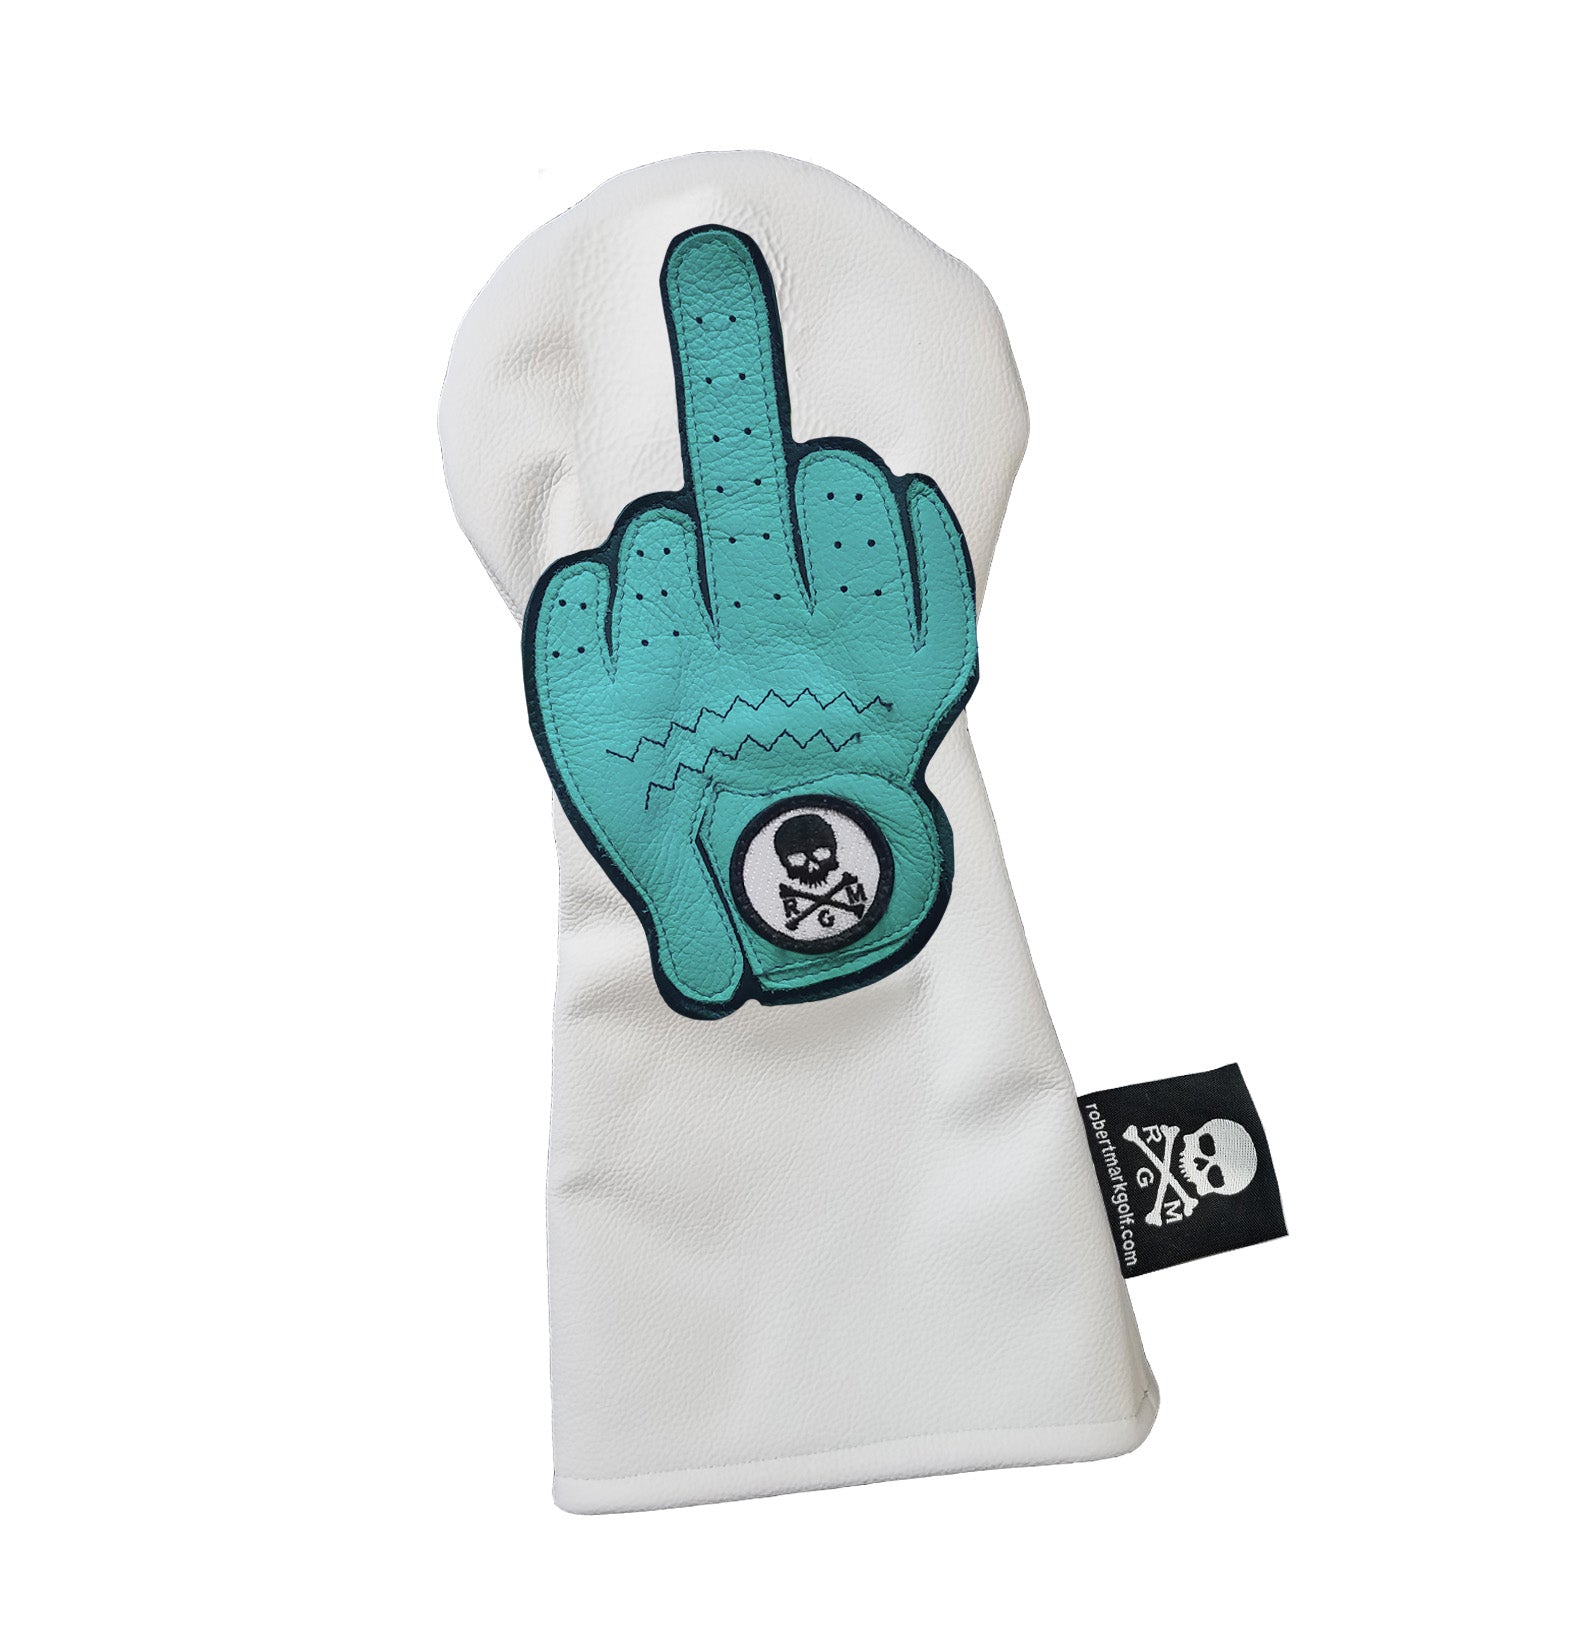 NEW! LTD Edition GFY "The Finger" Headcover - Multi Colors Available - Robert Mark Golf